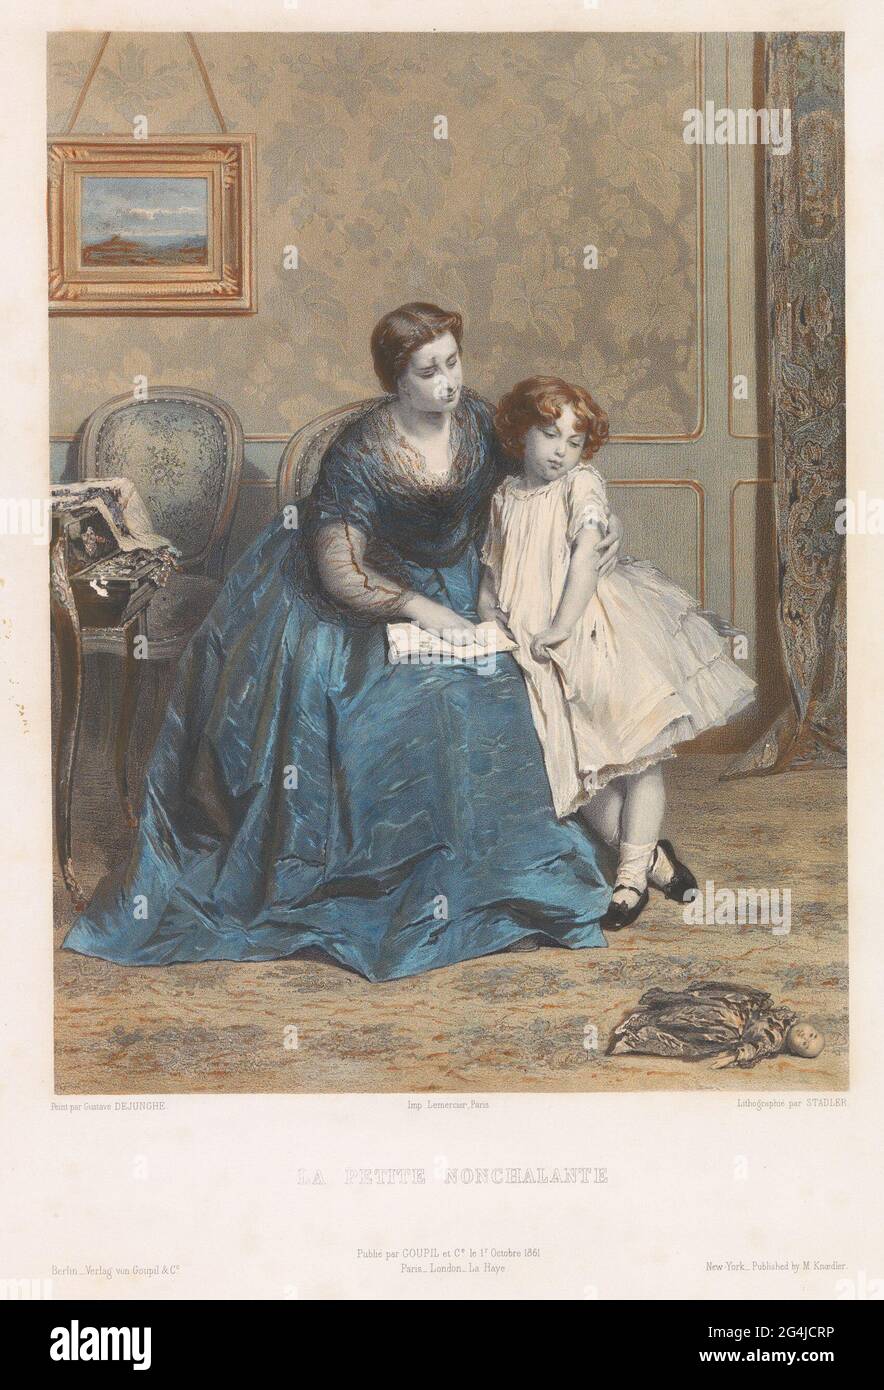 Woman and a girl reading together; La Petite Nonchalante. Interior with a woman in a dress on a chair with a book in her lap. Next to her is a young girl. The woman points to a word in the text with her finger. The girl has turned her head and looks at the doll lying on the floor. Stock Photo